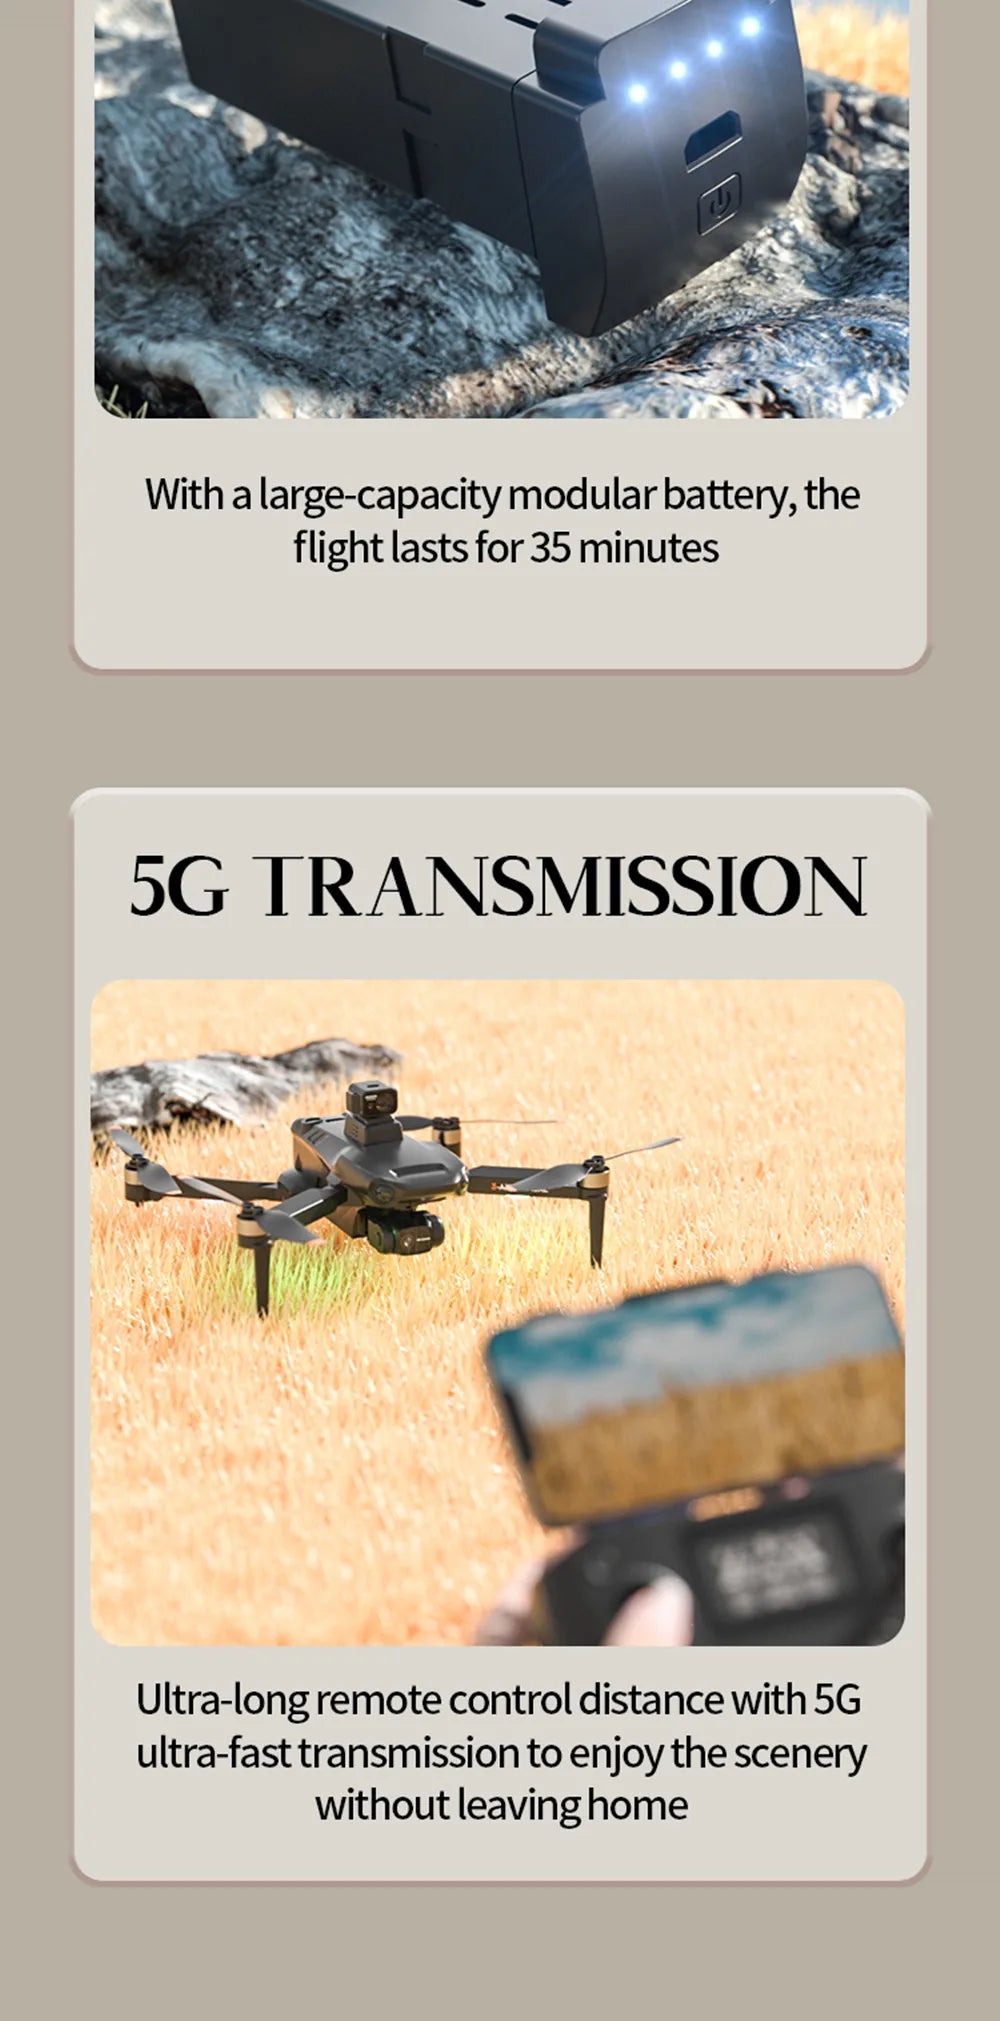 X38 PRO Drone, 5G TRANSMISSION Ultra-longremote control distance with 56 ultra-fast